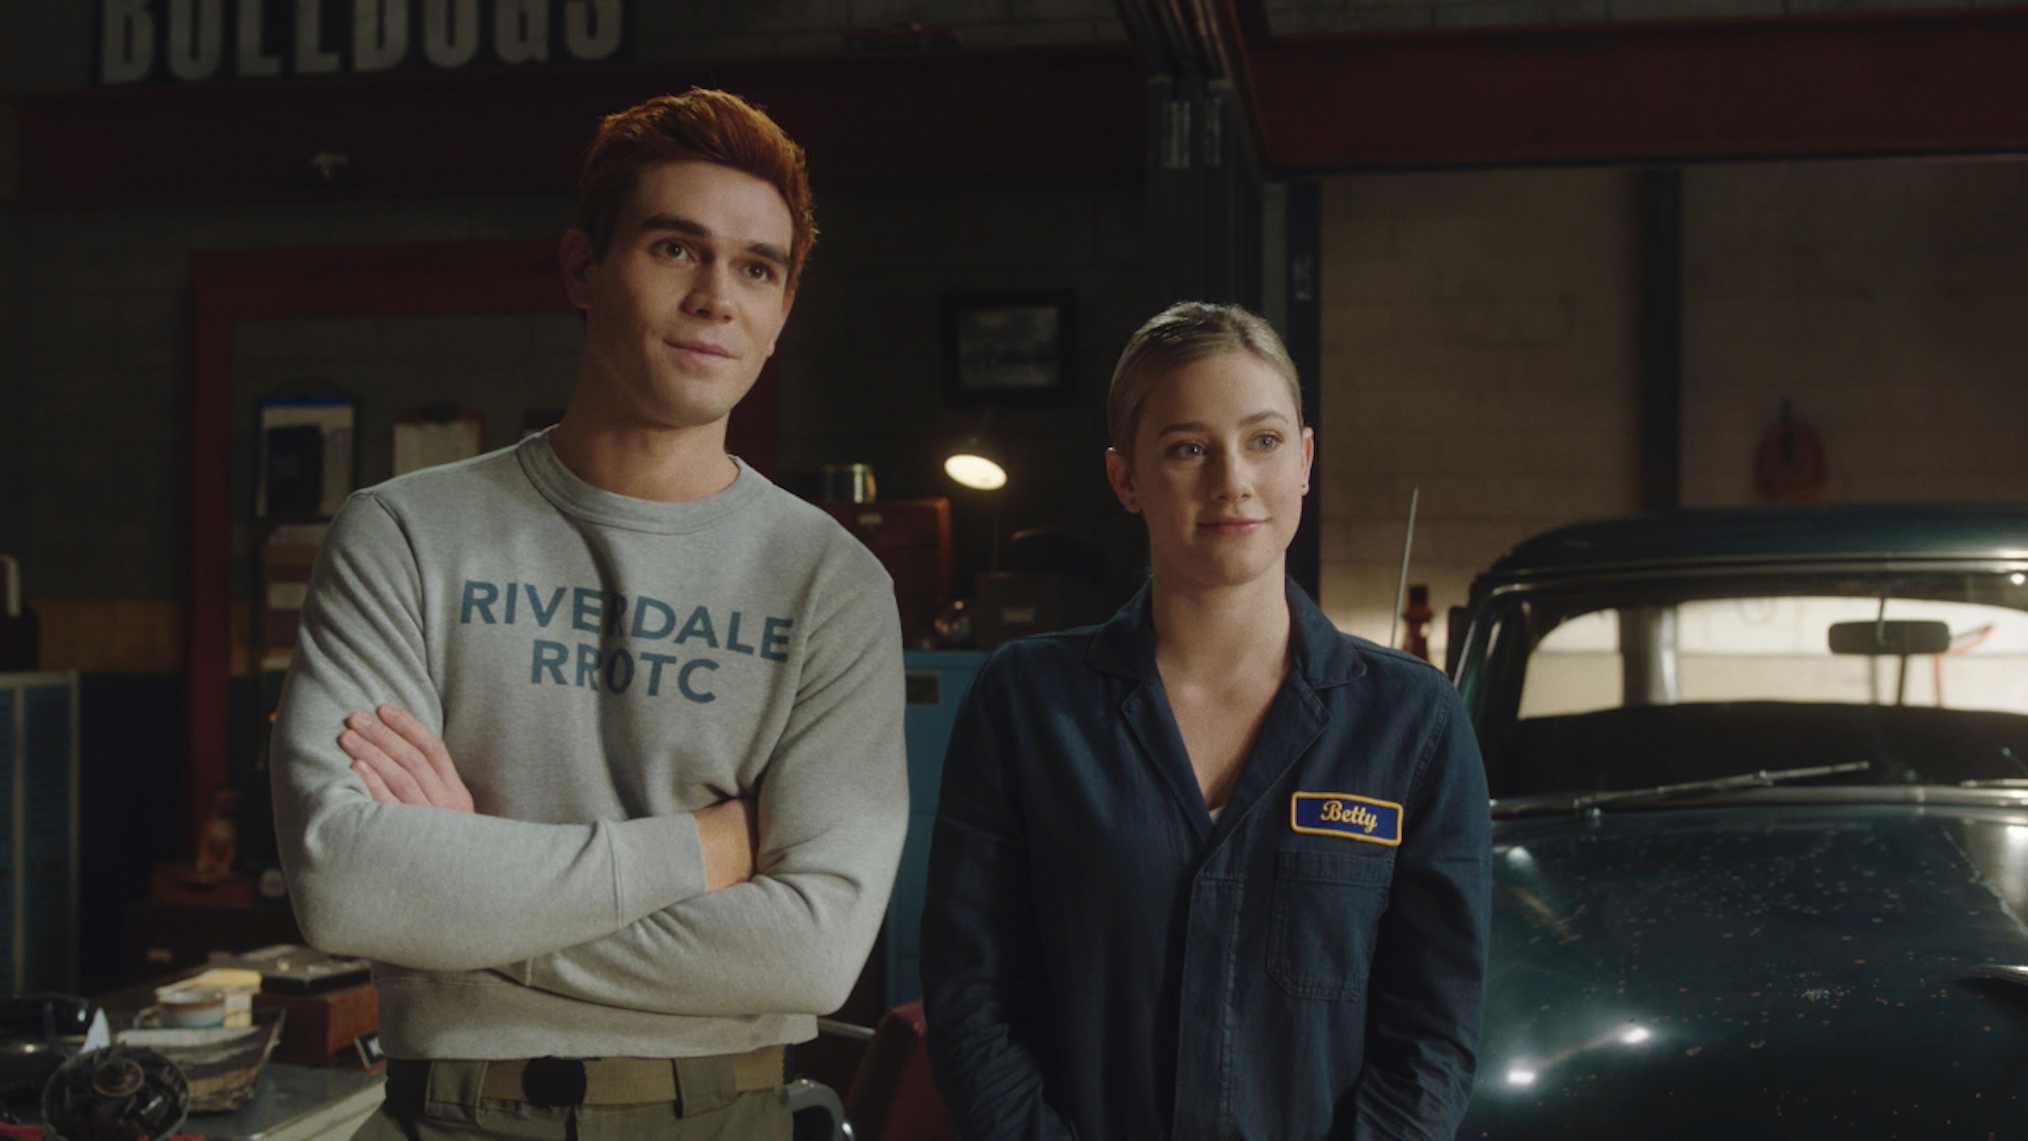 KJ Apa and Lili Reinhart as Archie Andrews and Betty Cooper in Riverdale